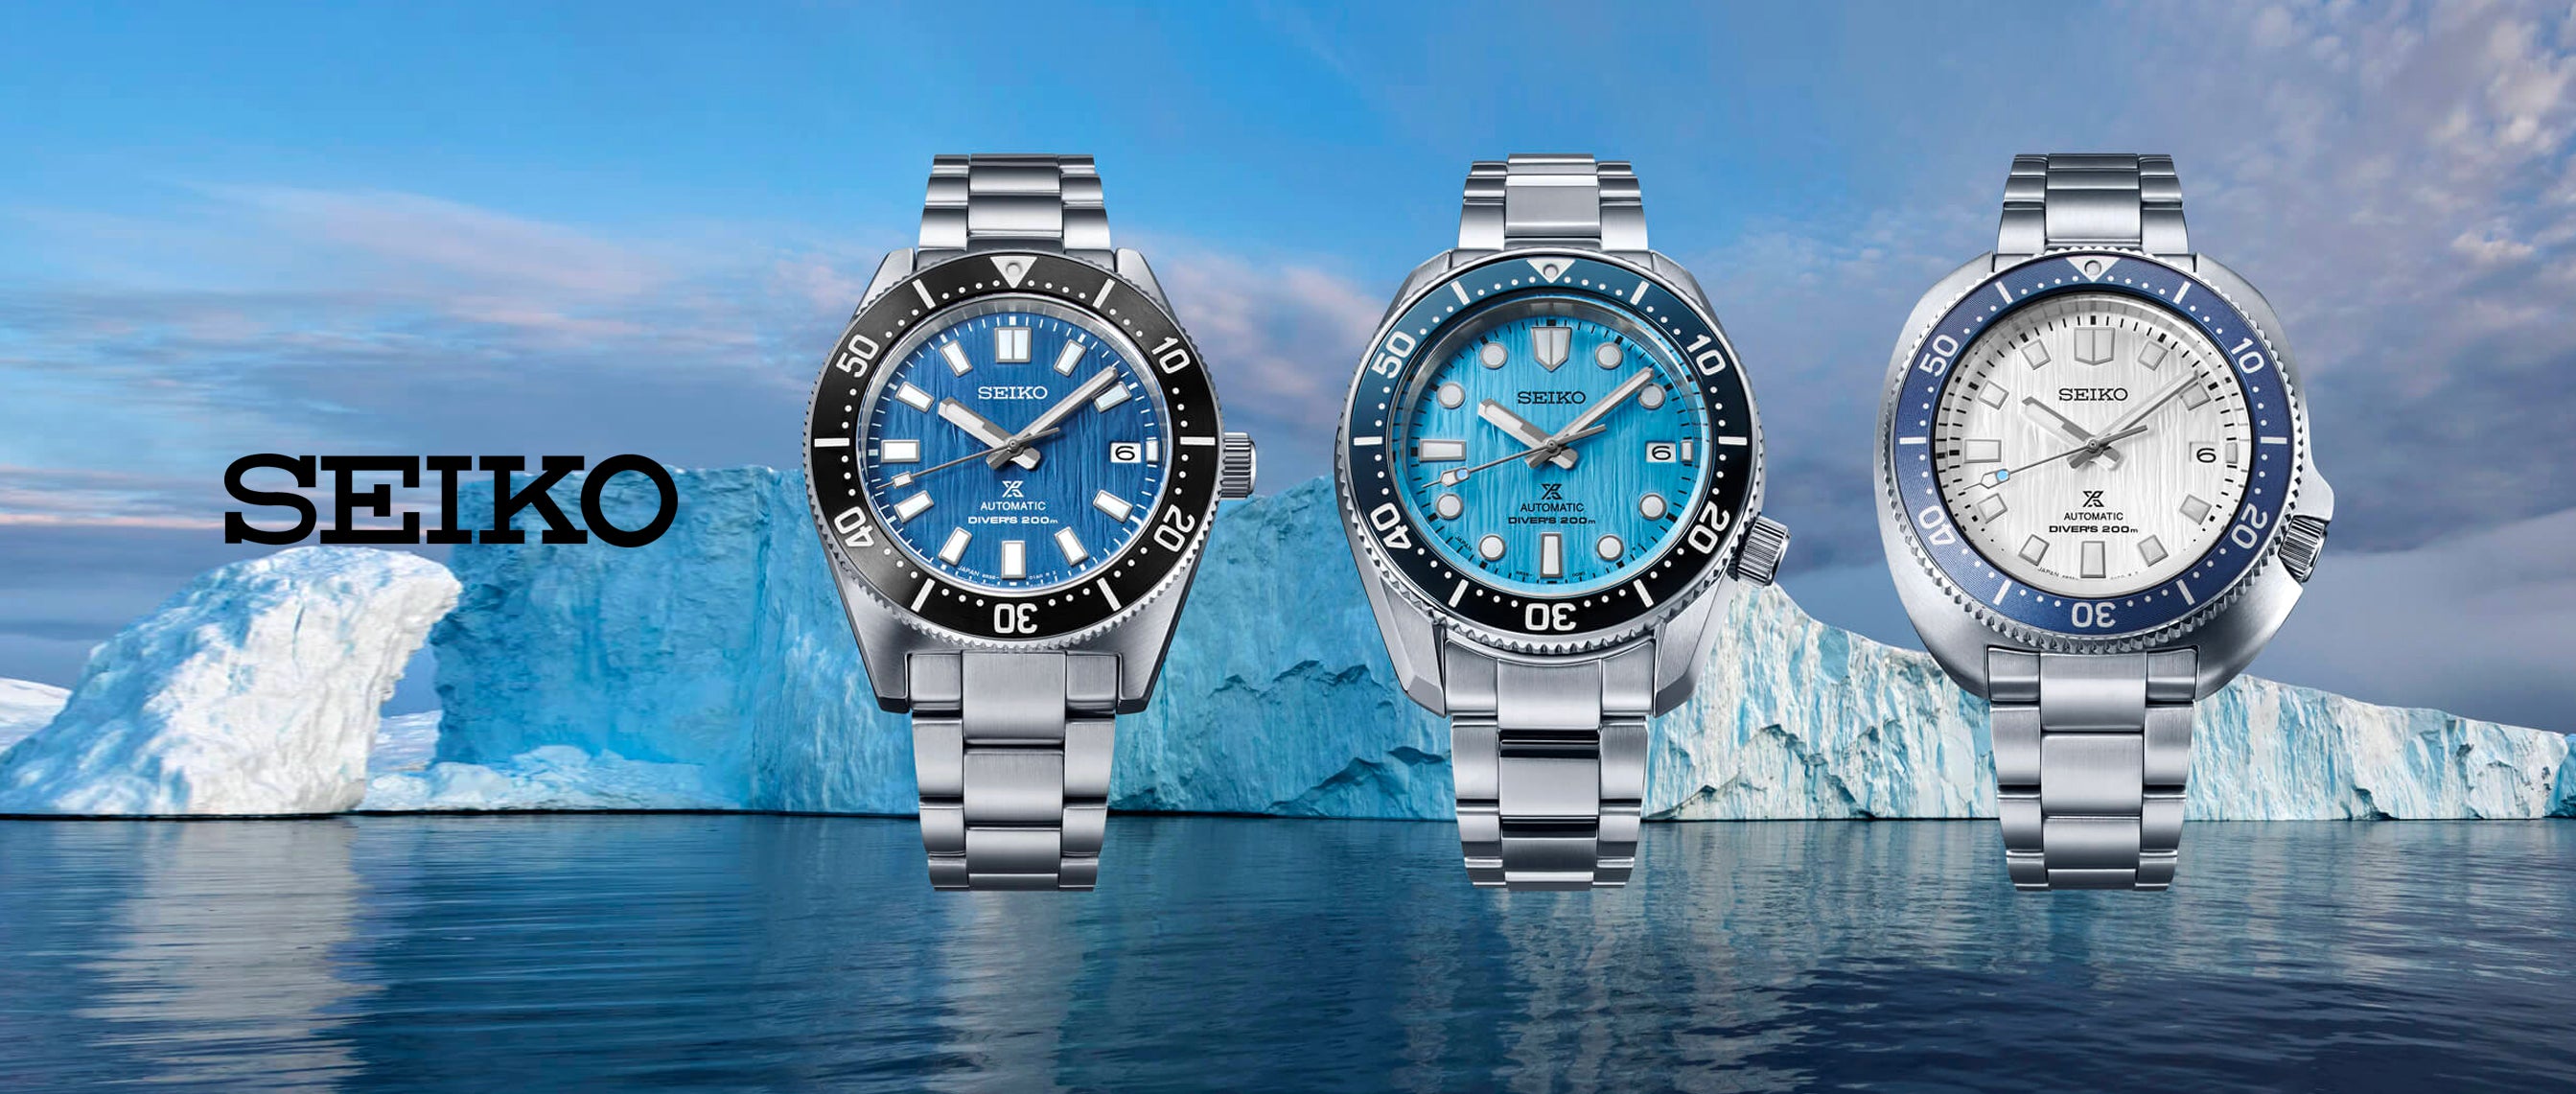 SEIKO Watches - Authorized Retailer - CH Premier Jewelers – Page 2